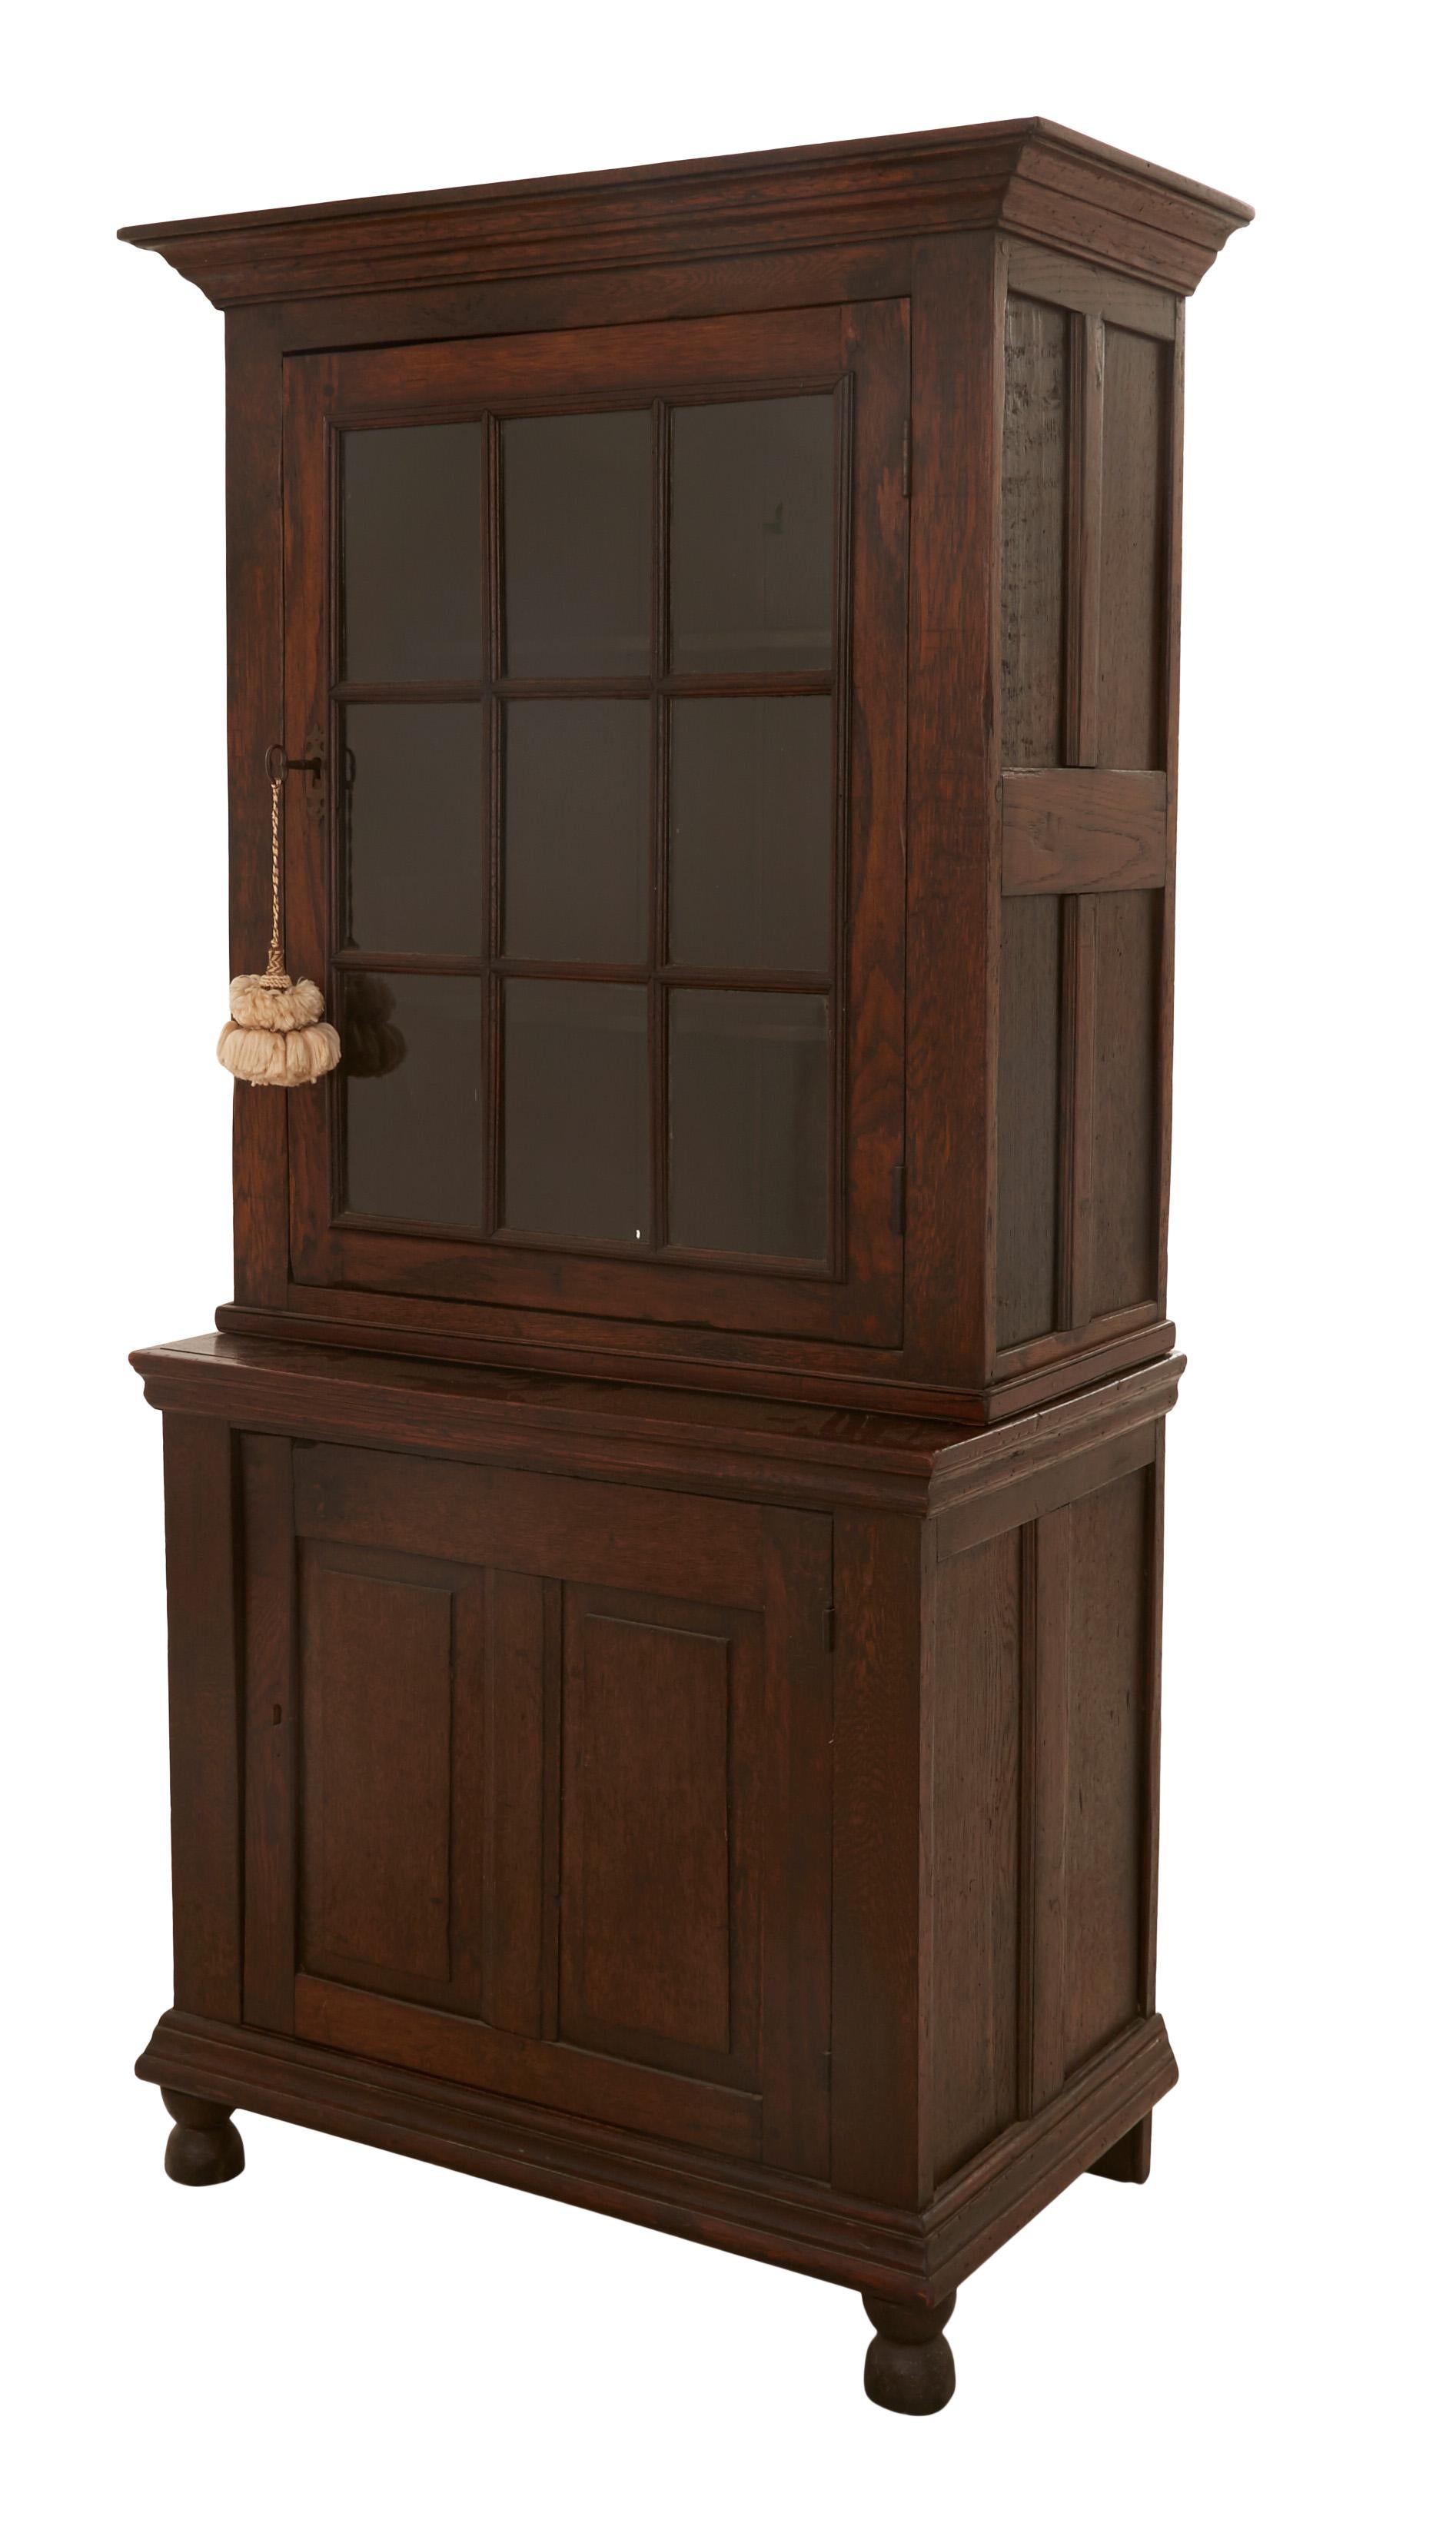 • Walnut
• 2 pieces (top and bottom)
• Top glass paneled door
• Early 20th century
• American

Dimensions
• Overall: 35